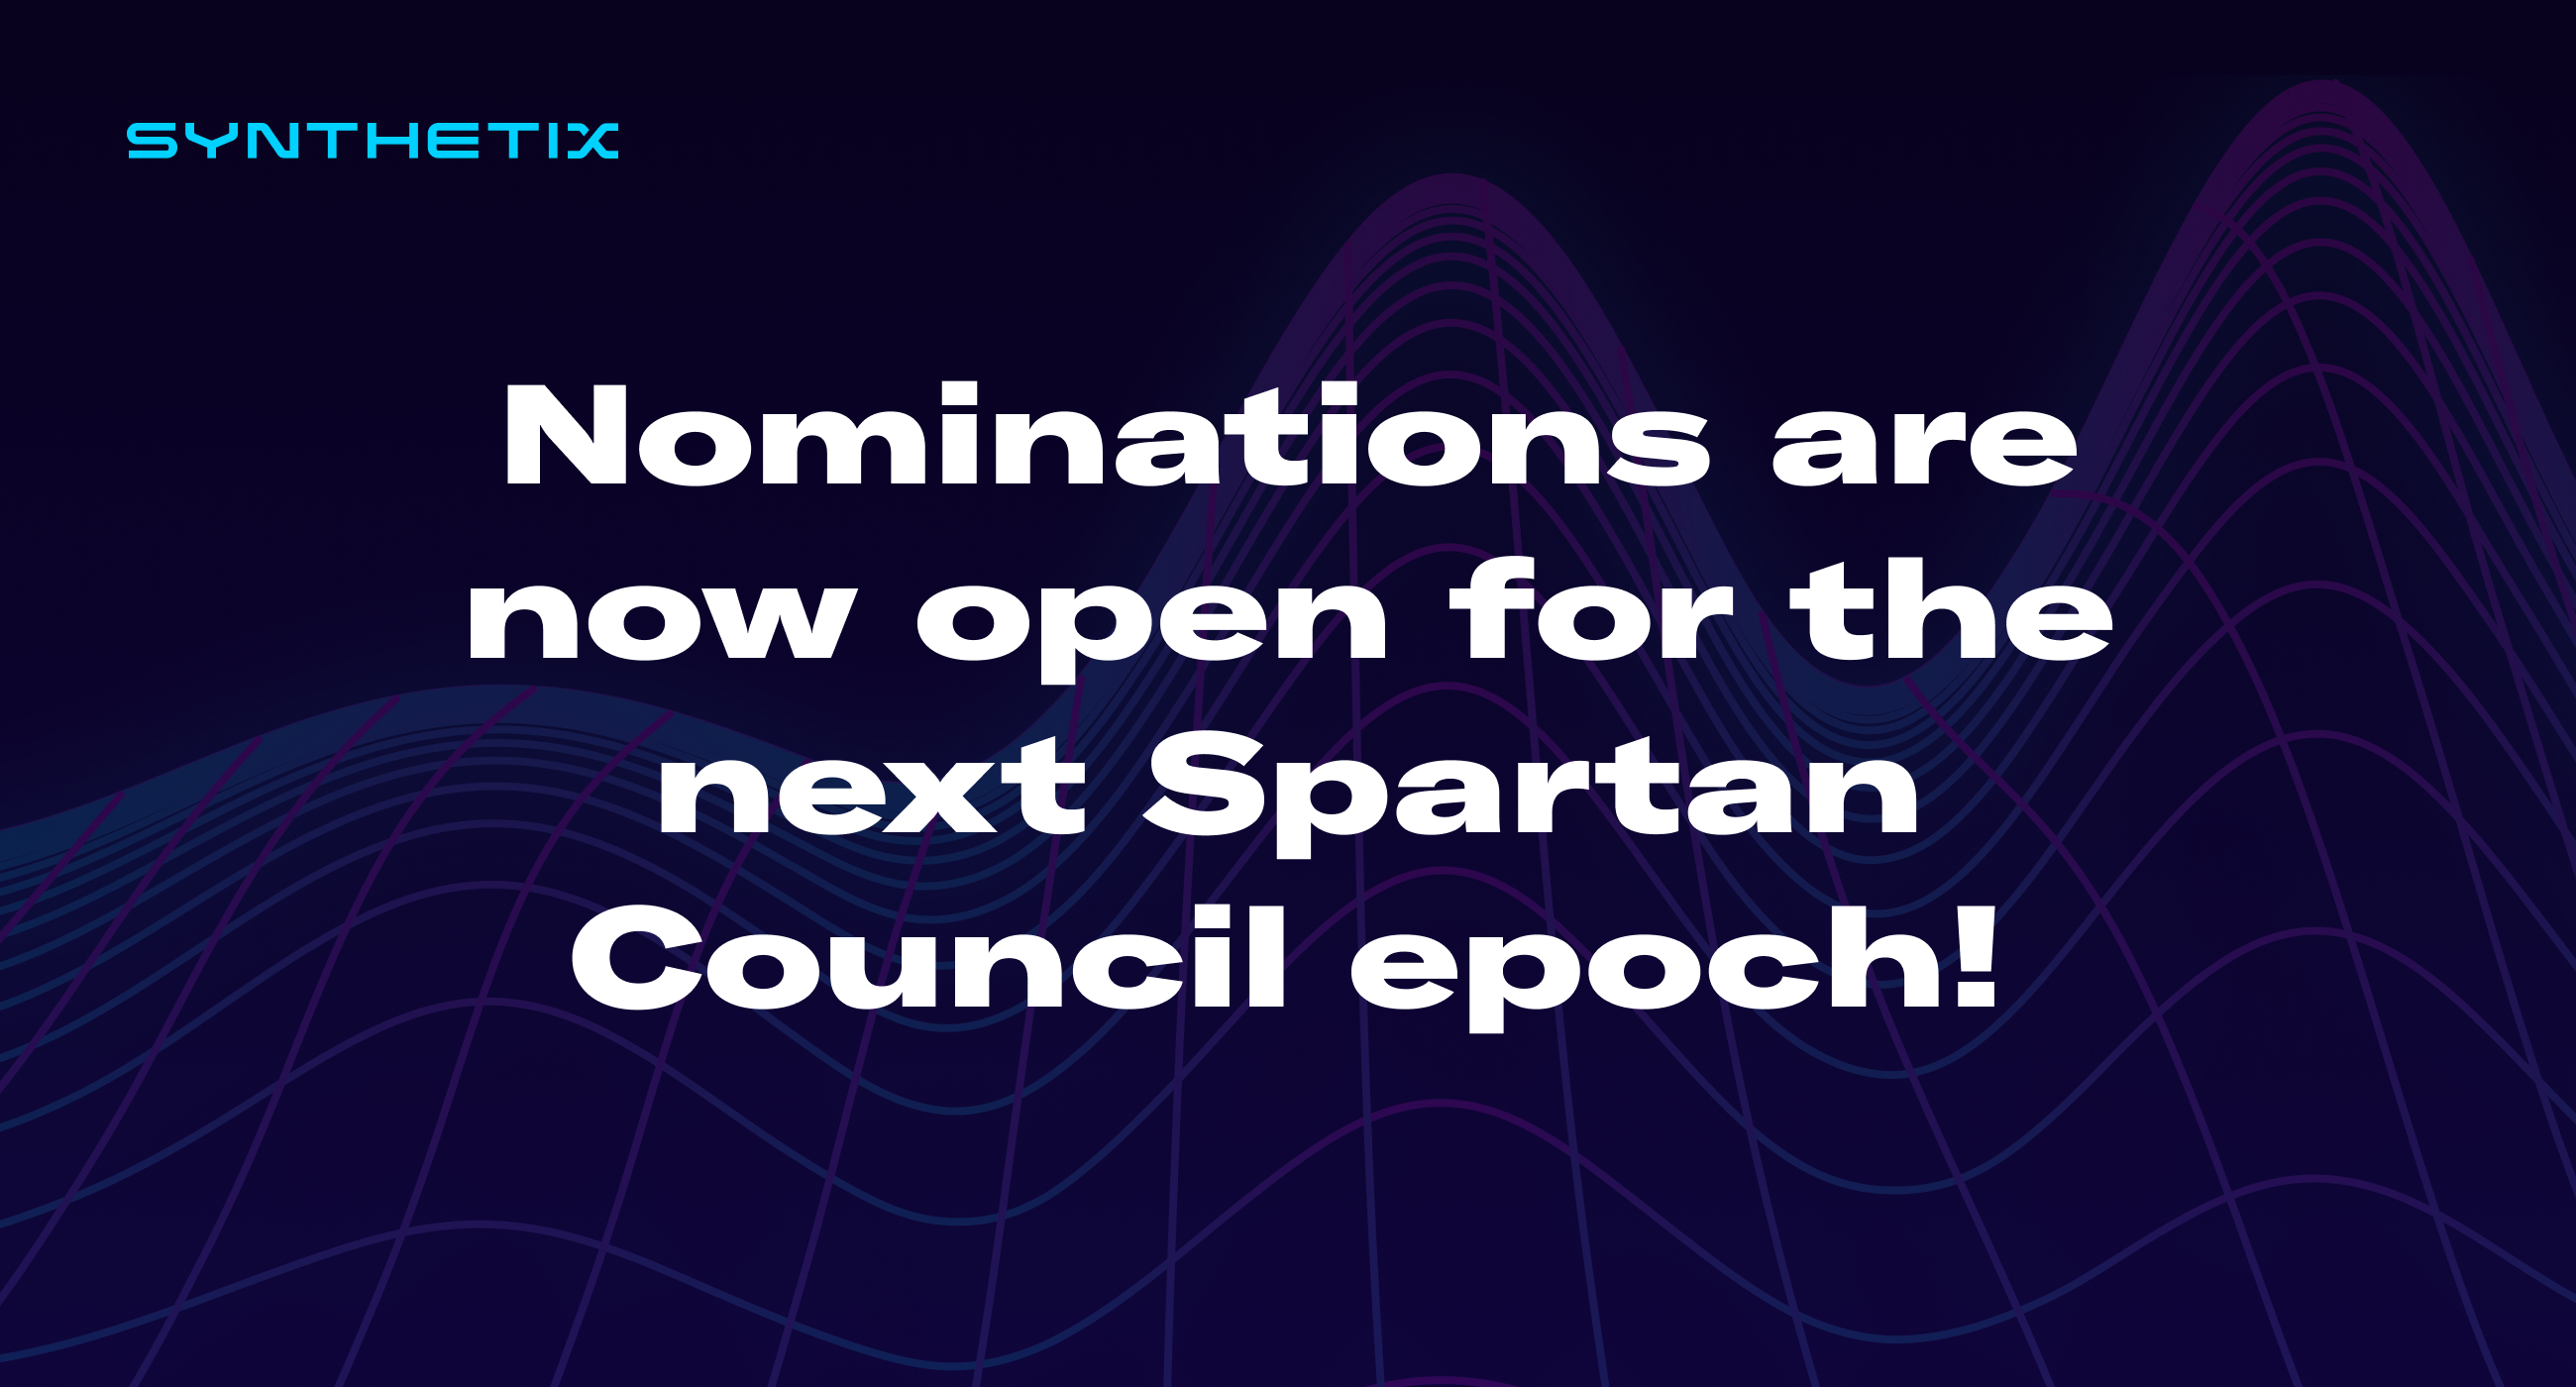 Nominations are now open for the next epoch’s Spartan Council!